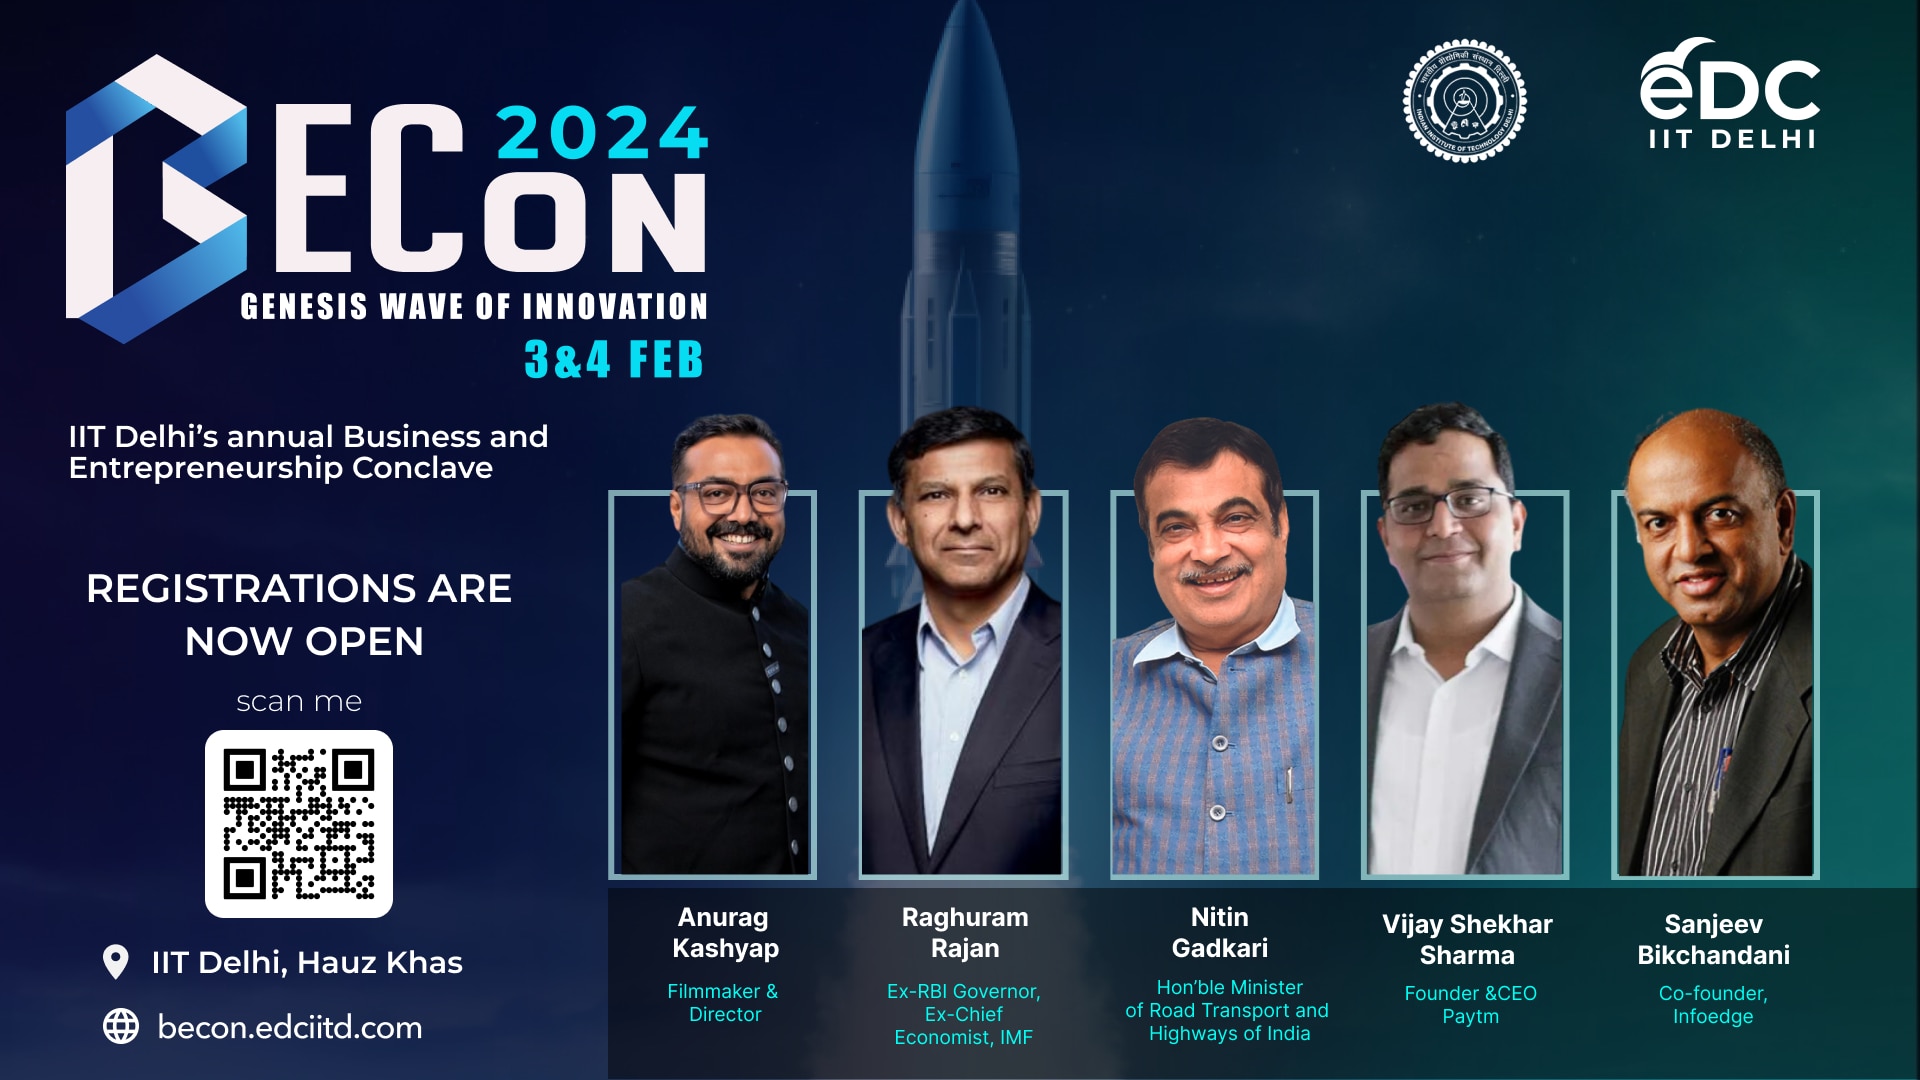 BECon'24: Delhi IIT All Set For Annual Event, To Host Gadkari, Kiran Bedi, Anurag Kashyap Among Others